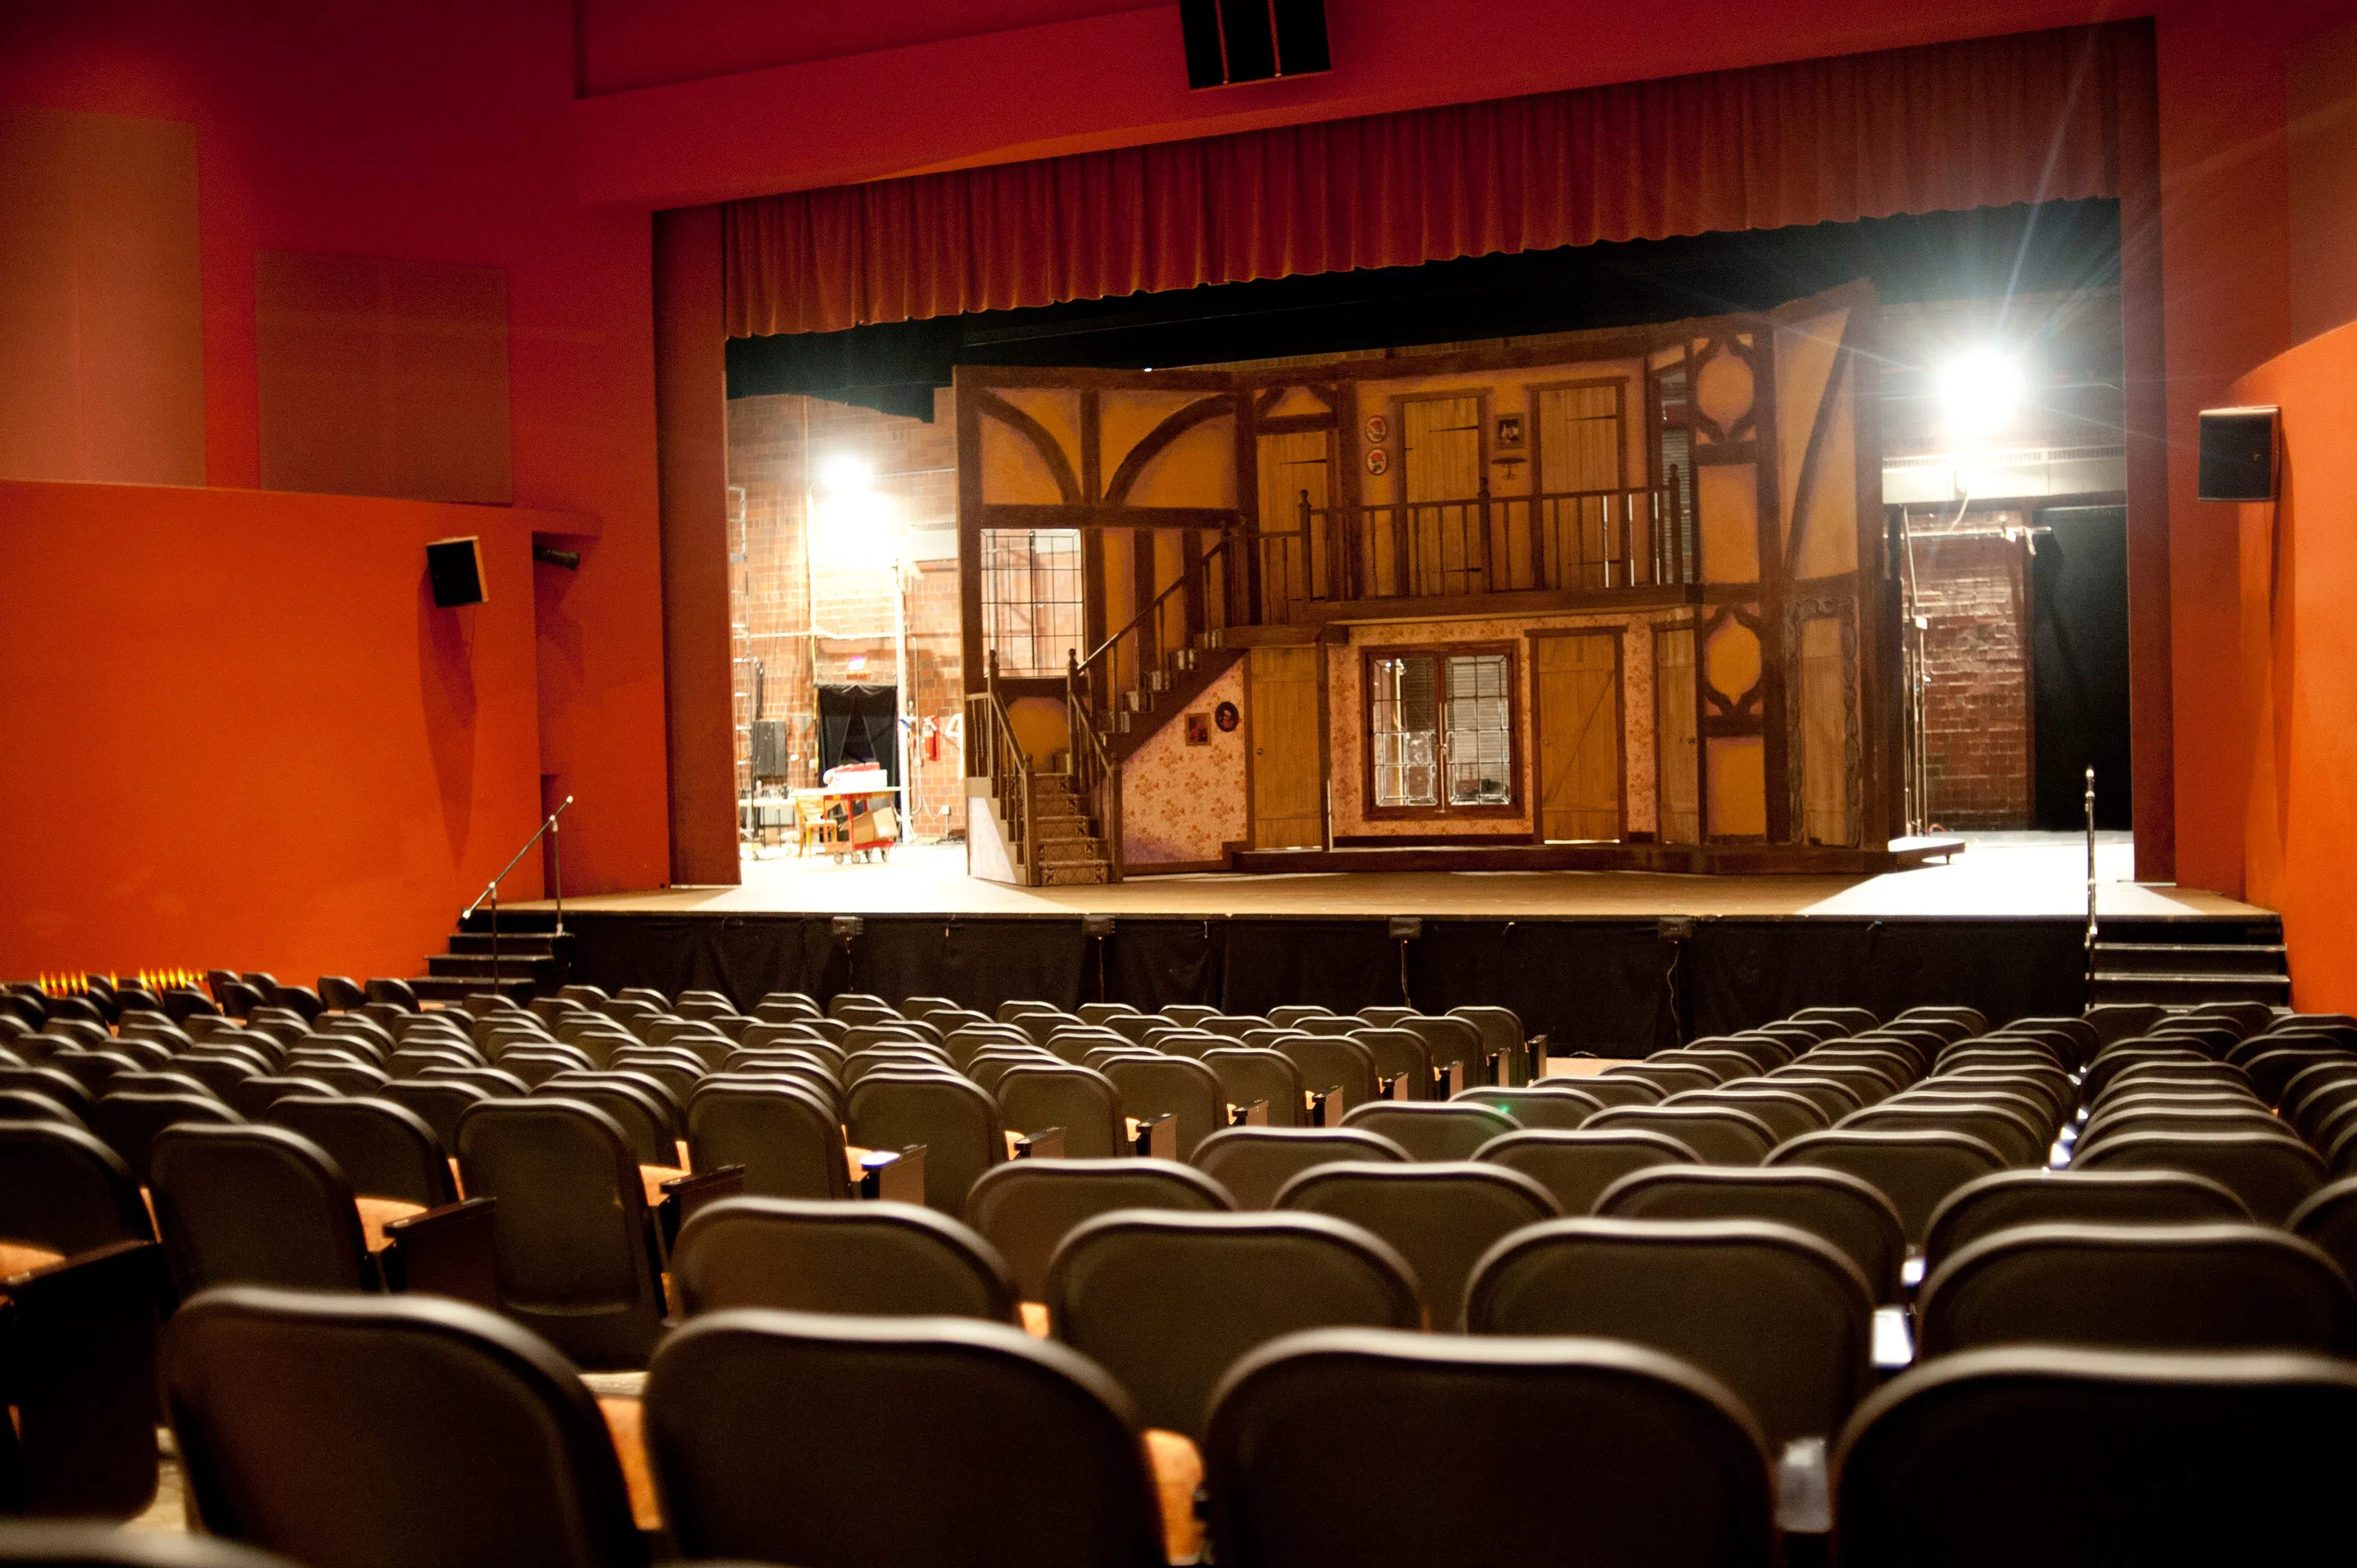 A brightly lit theater area with a wooden set on stage.